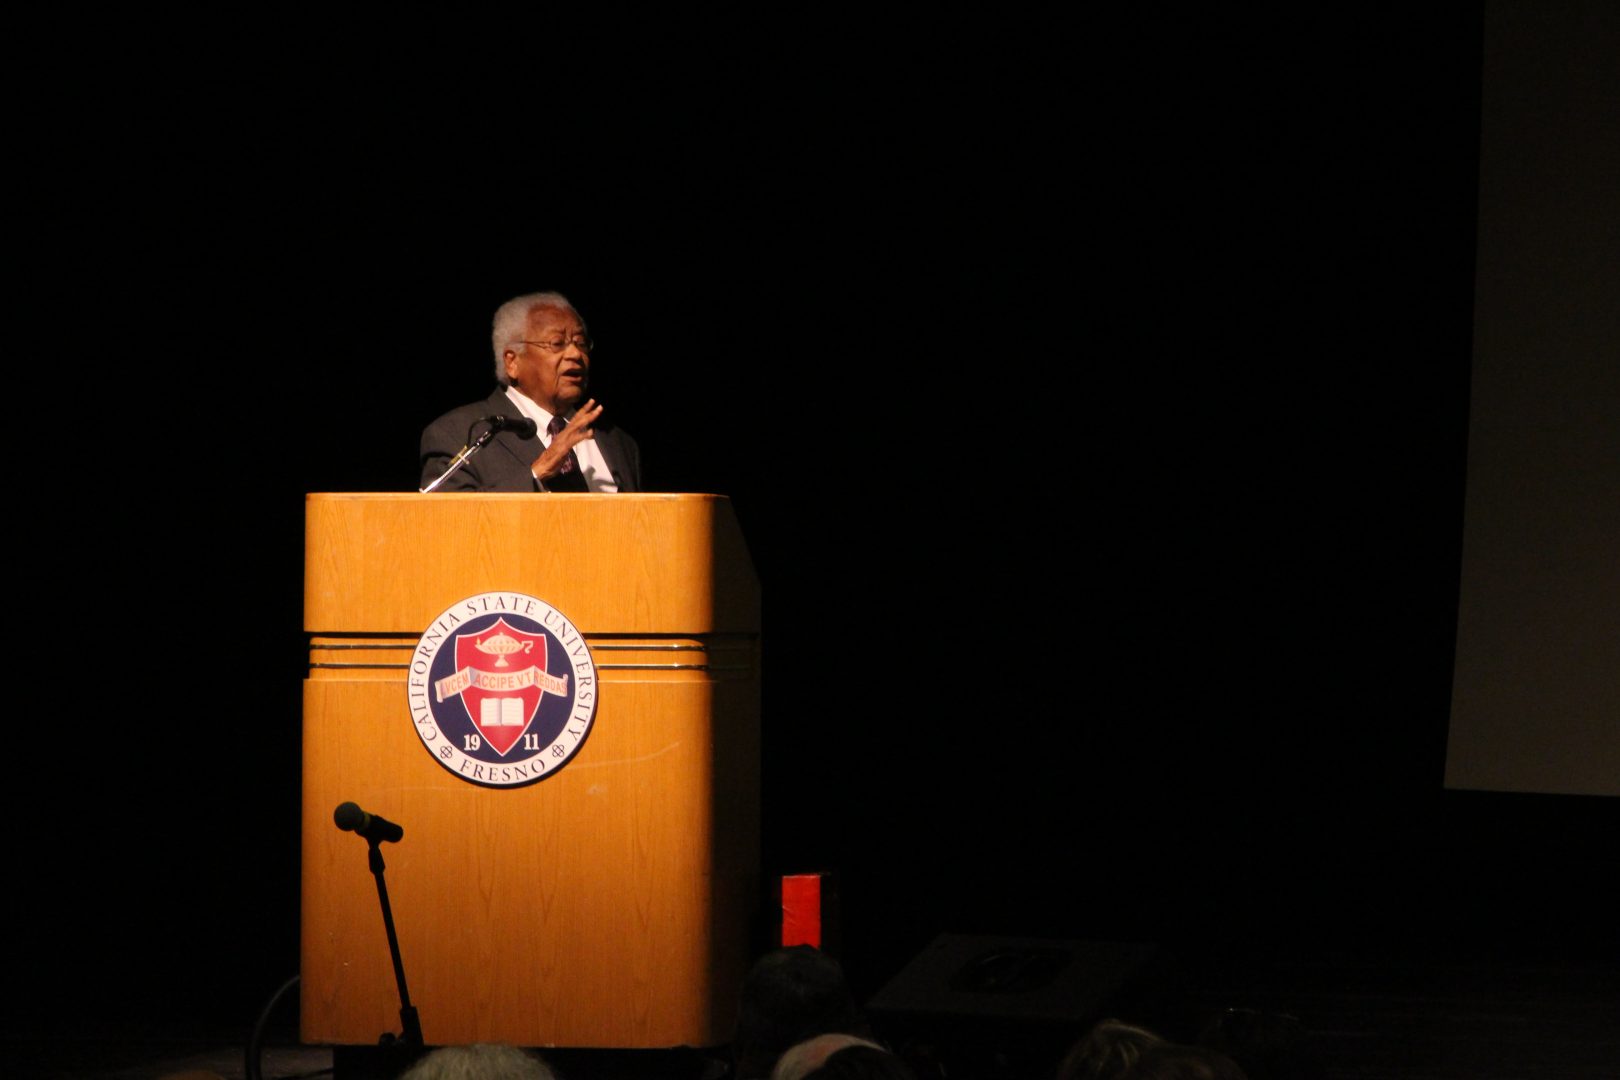 Rev James M. Lawson Jr. speaks in the Satellite Student Union in his keynote address, Gandhi and King on the “Arduous Beautiful Struggle”: Lessons in Going Forward, on Oct. 10, 2019, at Fresno State. (Zaeem Shaikh/The Collegian)